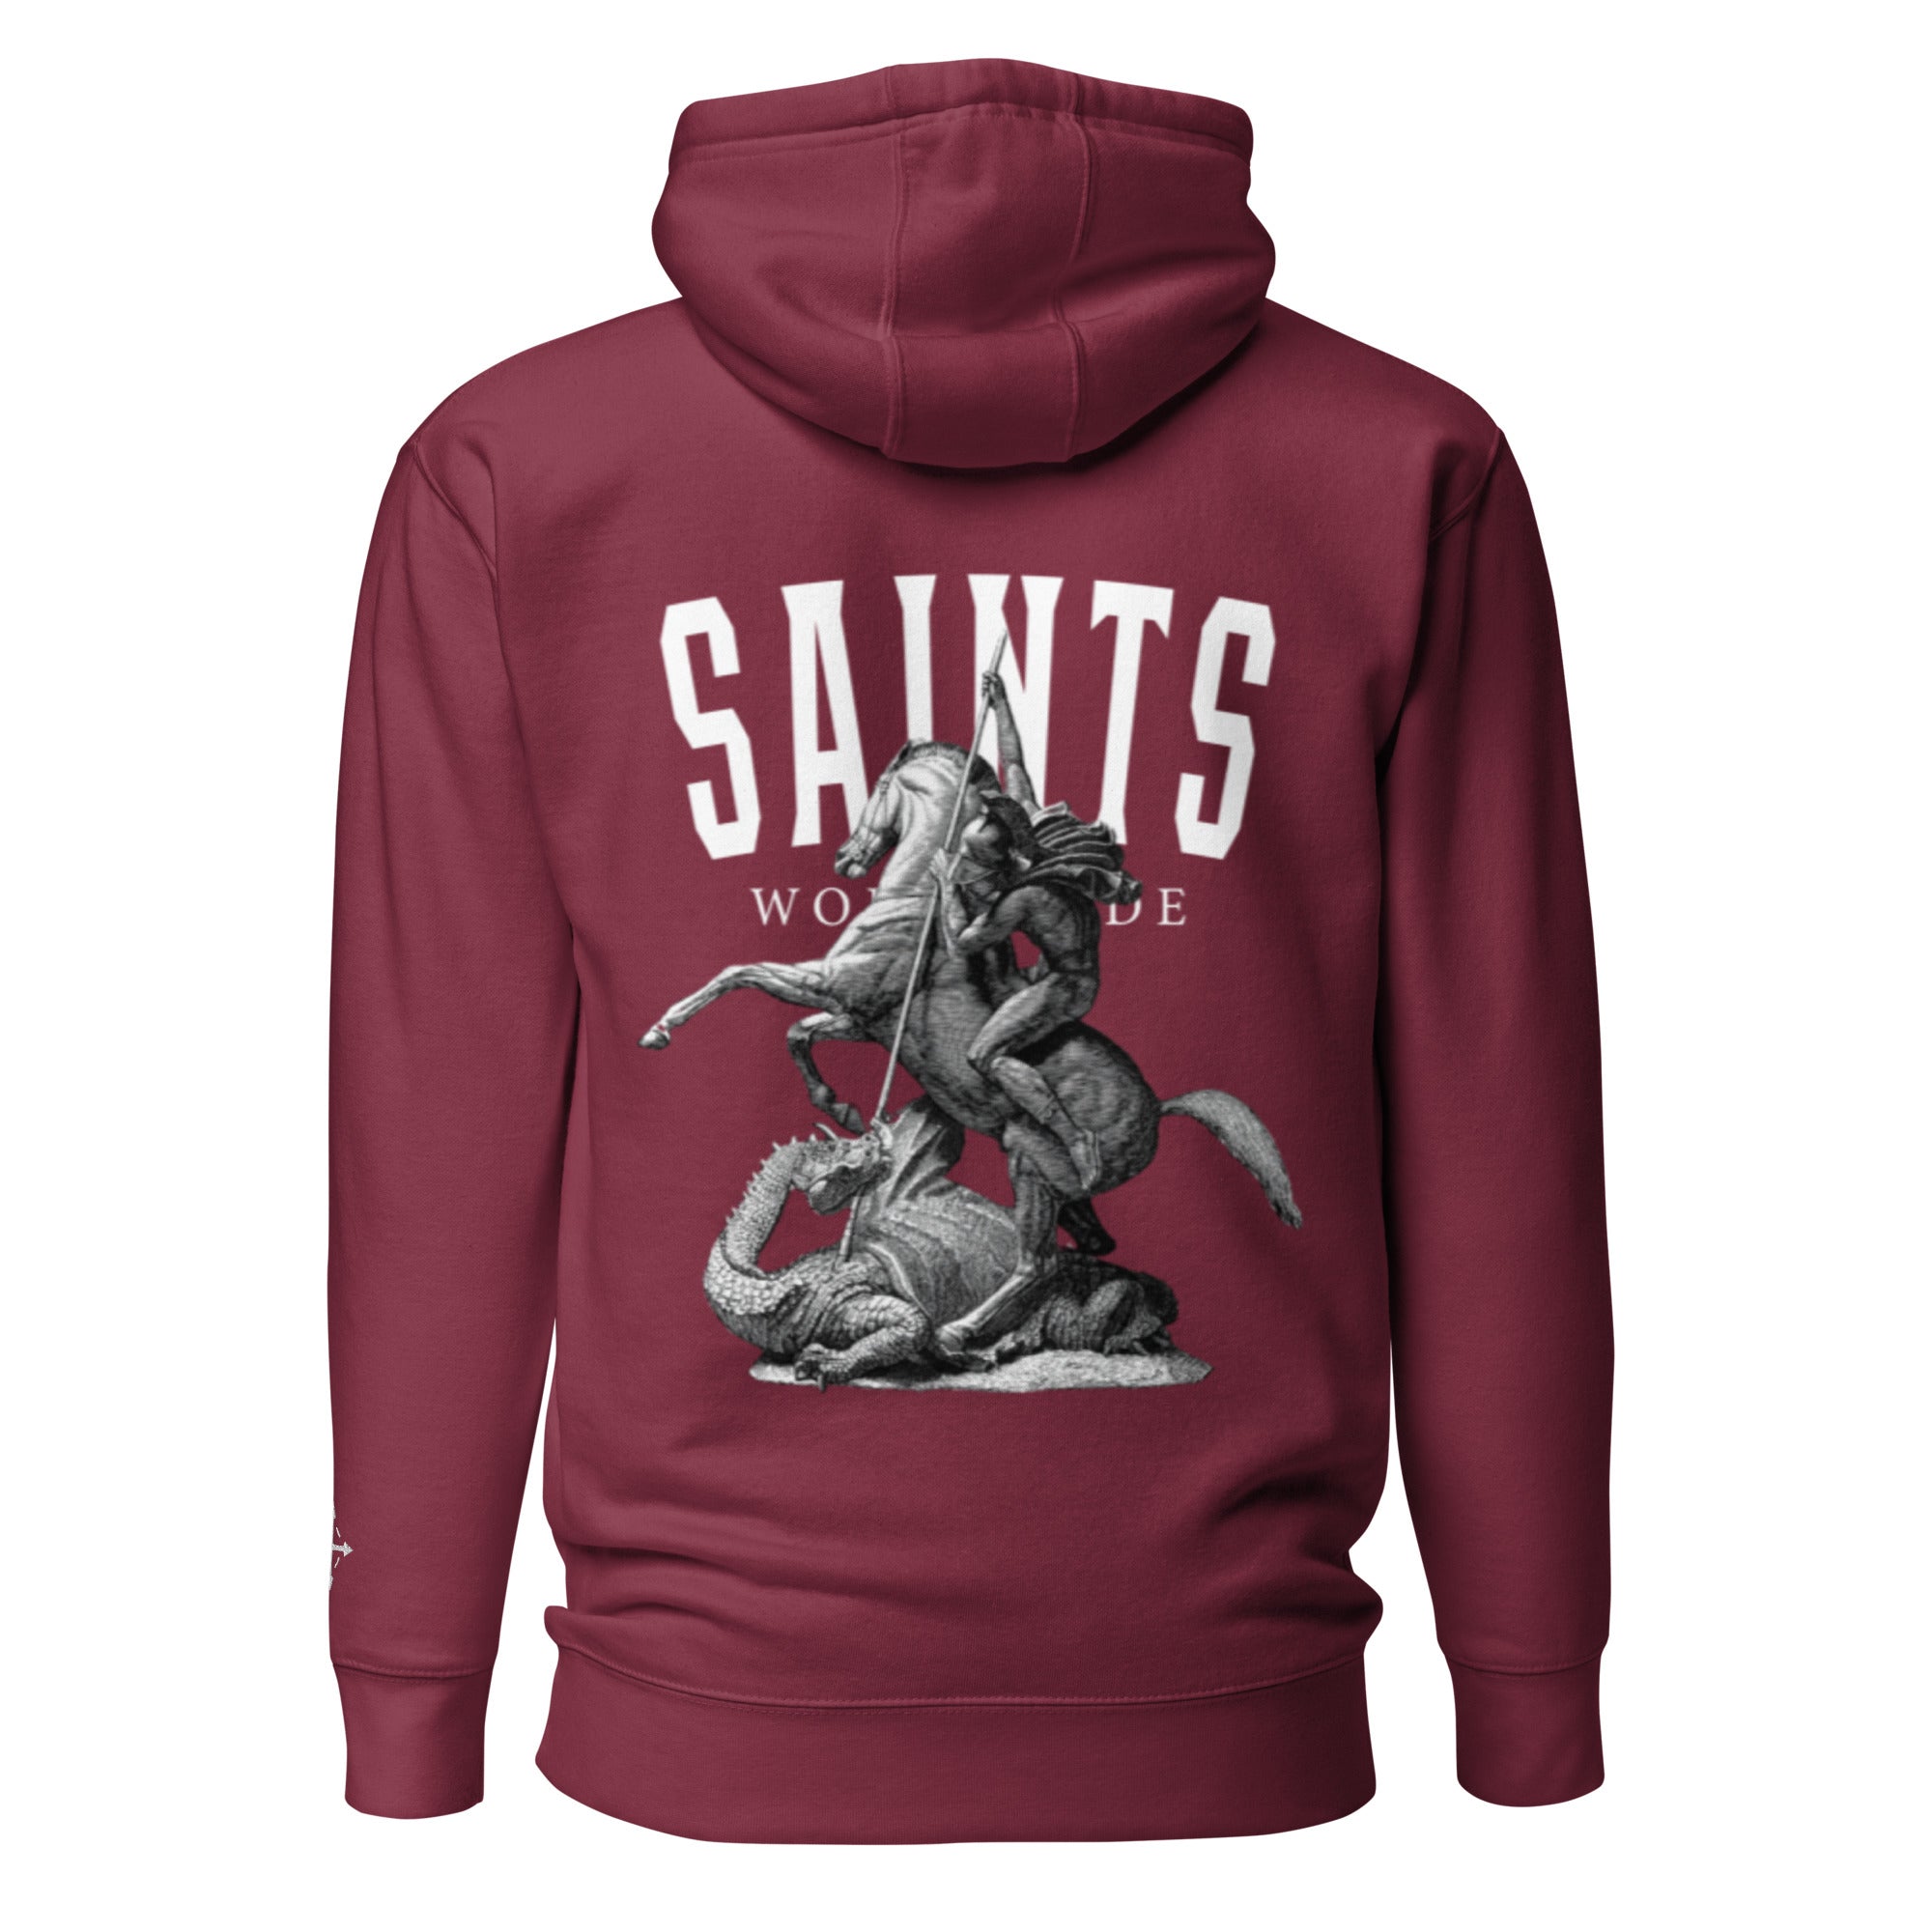 SAINTS WORLDWIDE Embroidered Hoodie - Maroon - Great Commission Company